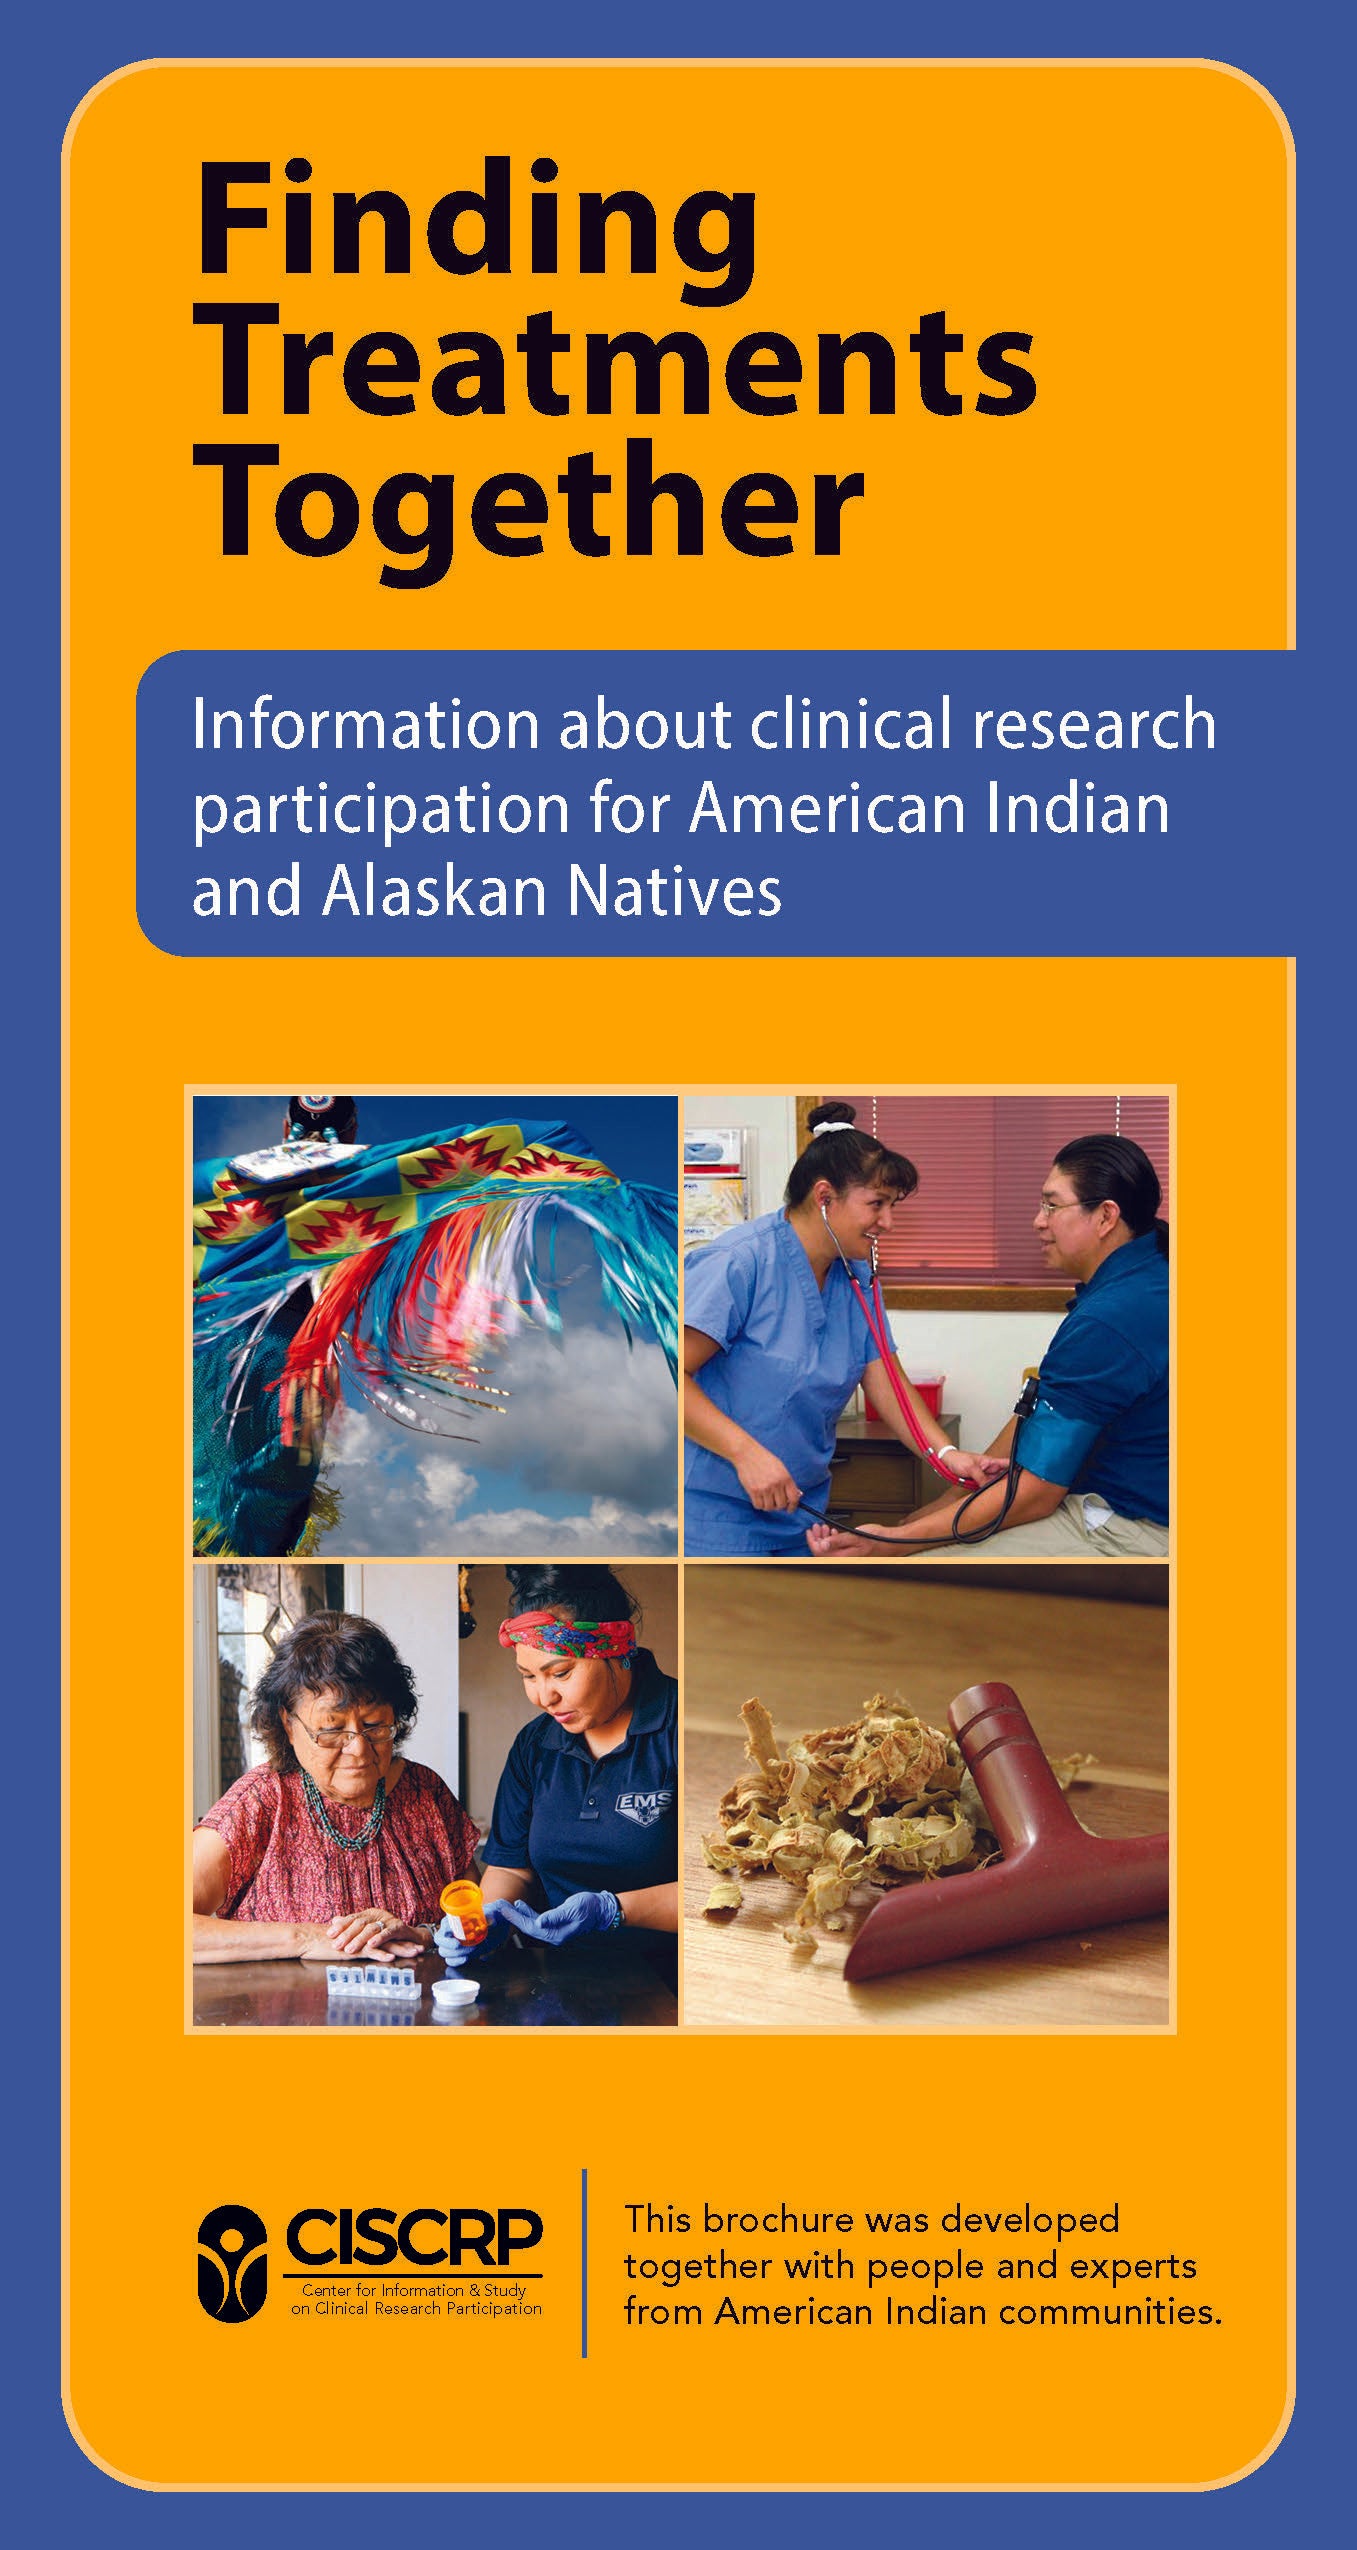 Clinical Research for American Indian and Alaskan Native Communities